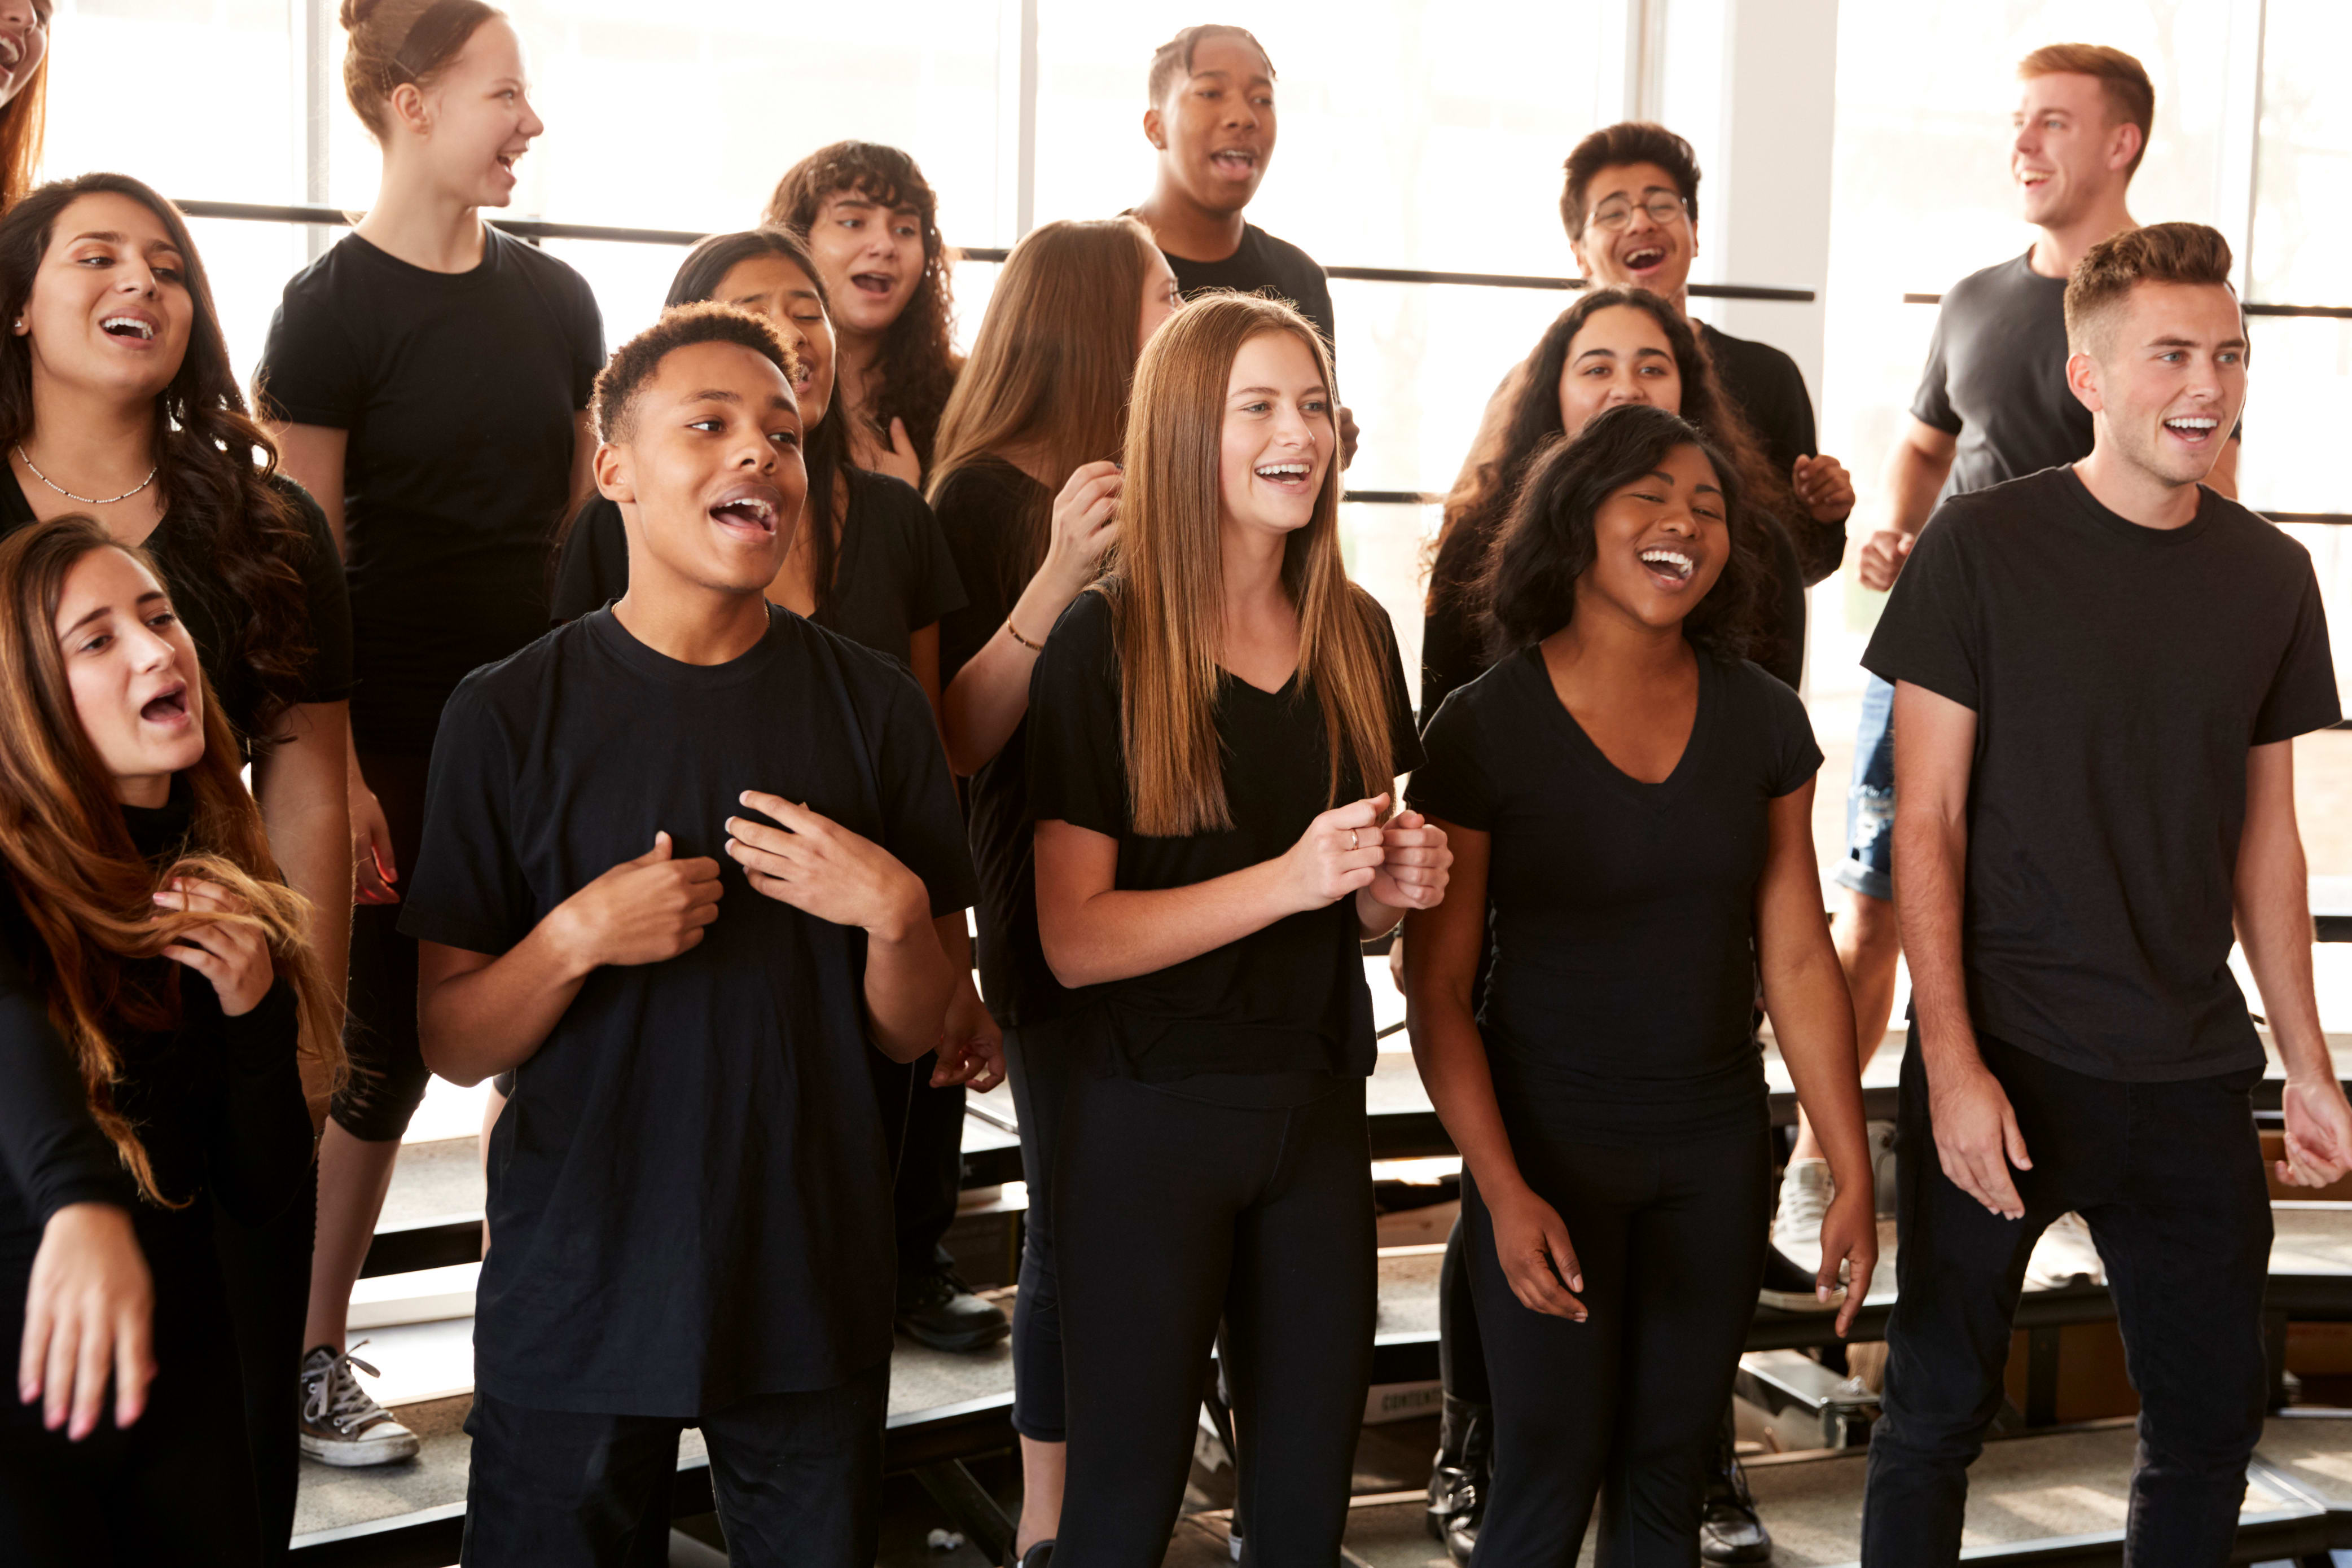 choir performing together